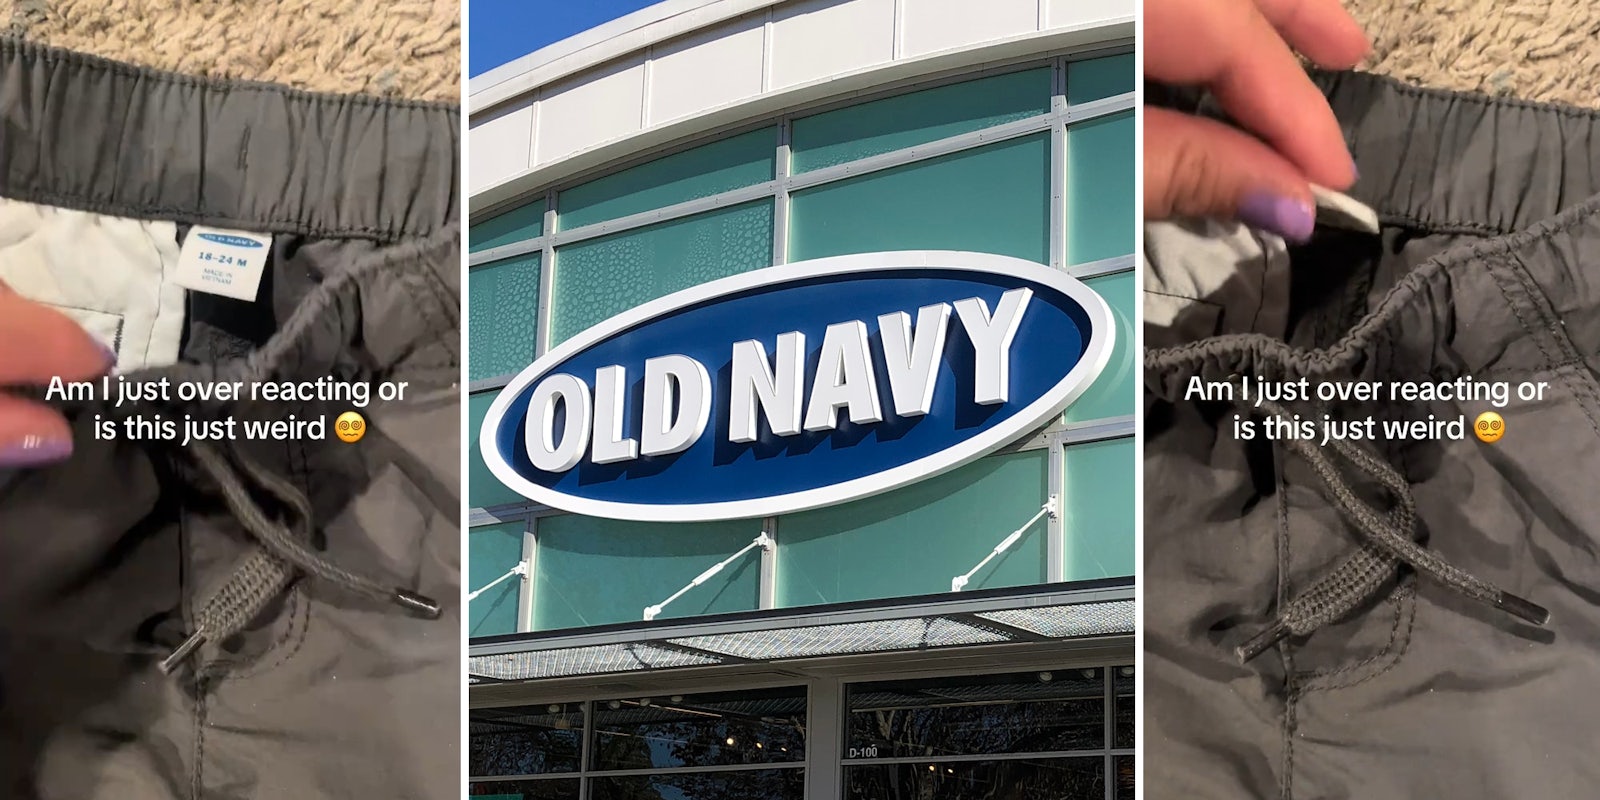 woman checking swimsuit tag with caption 'Am I just over reacting or is this just weird' (l&r) Old Navy sign (c)